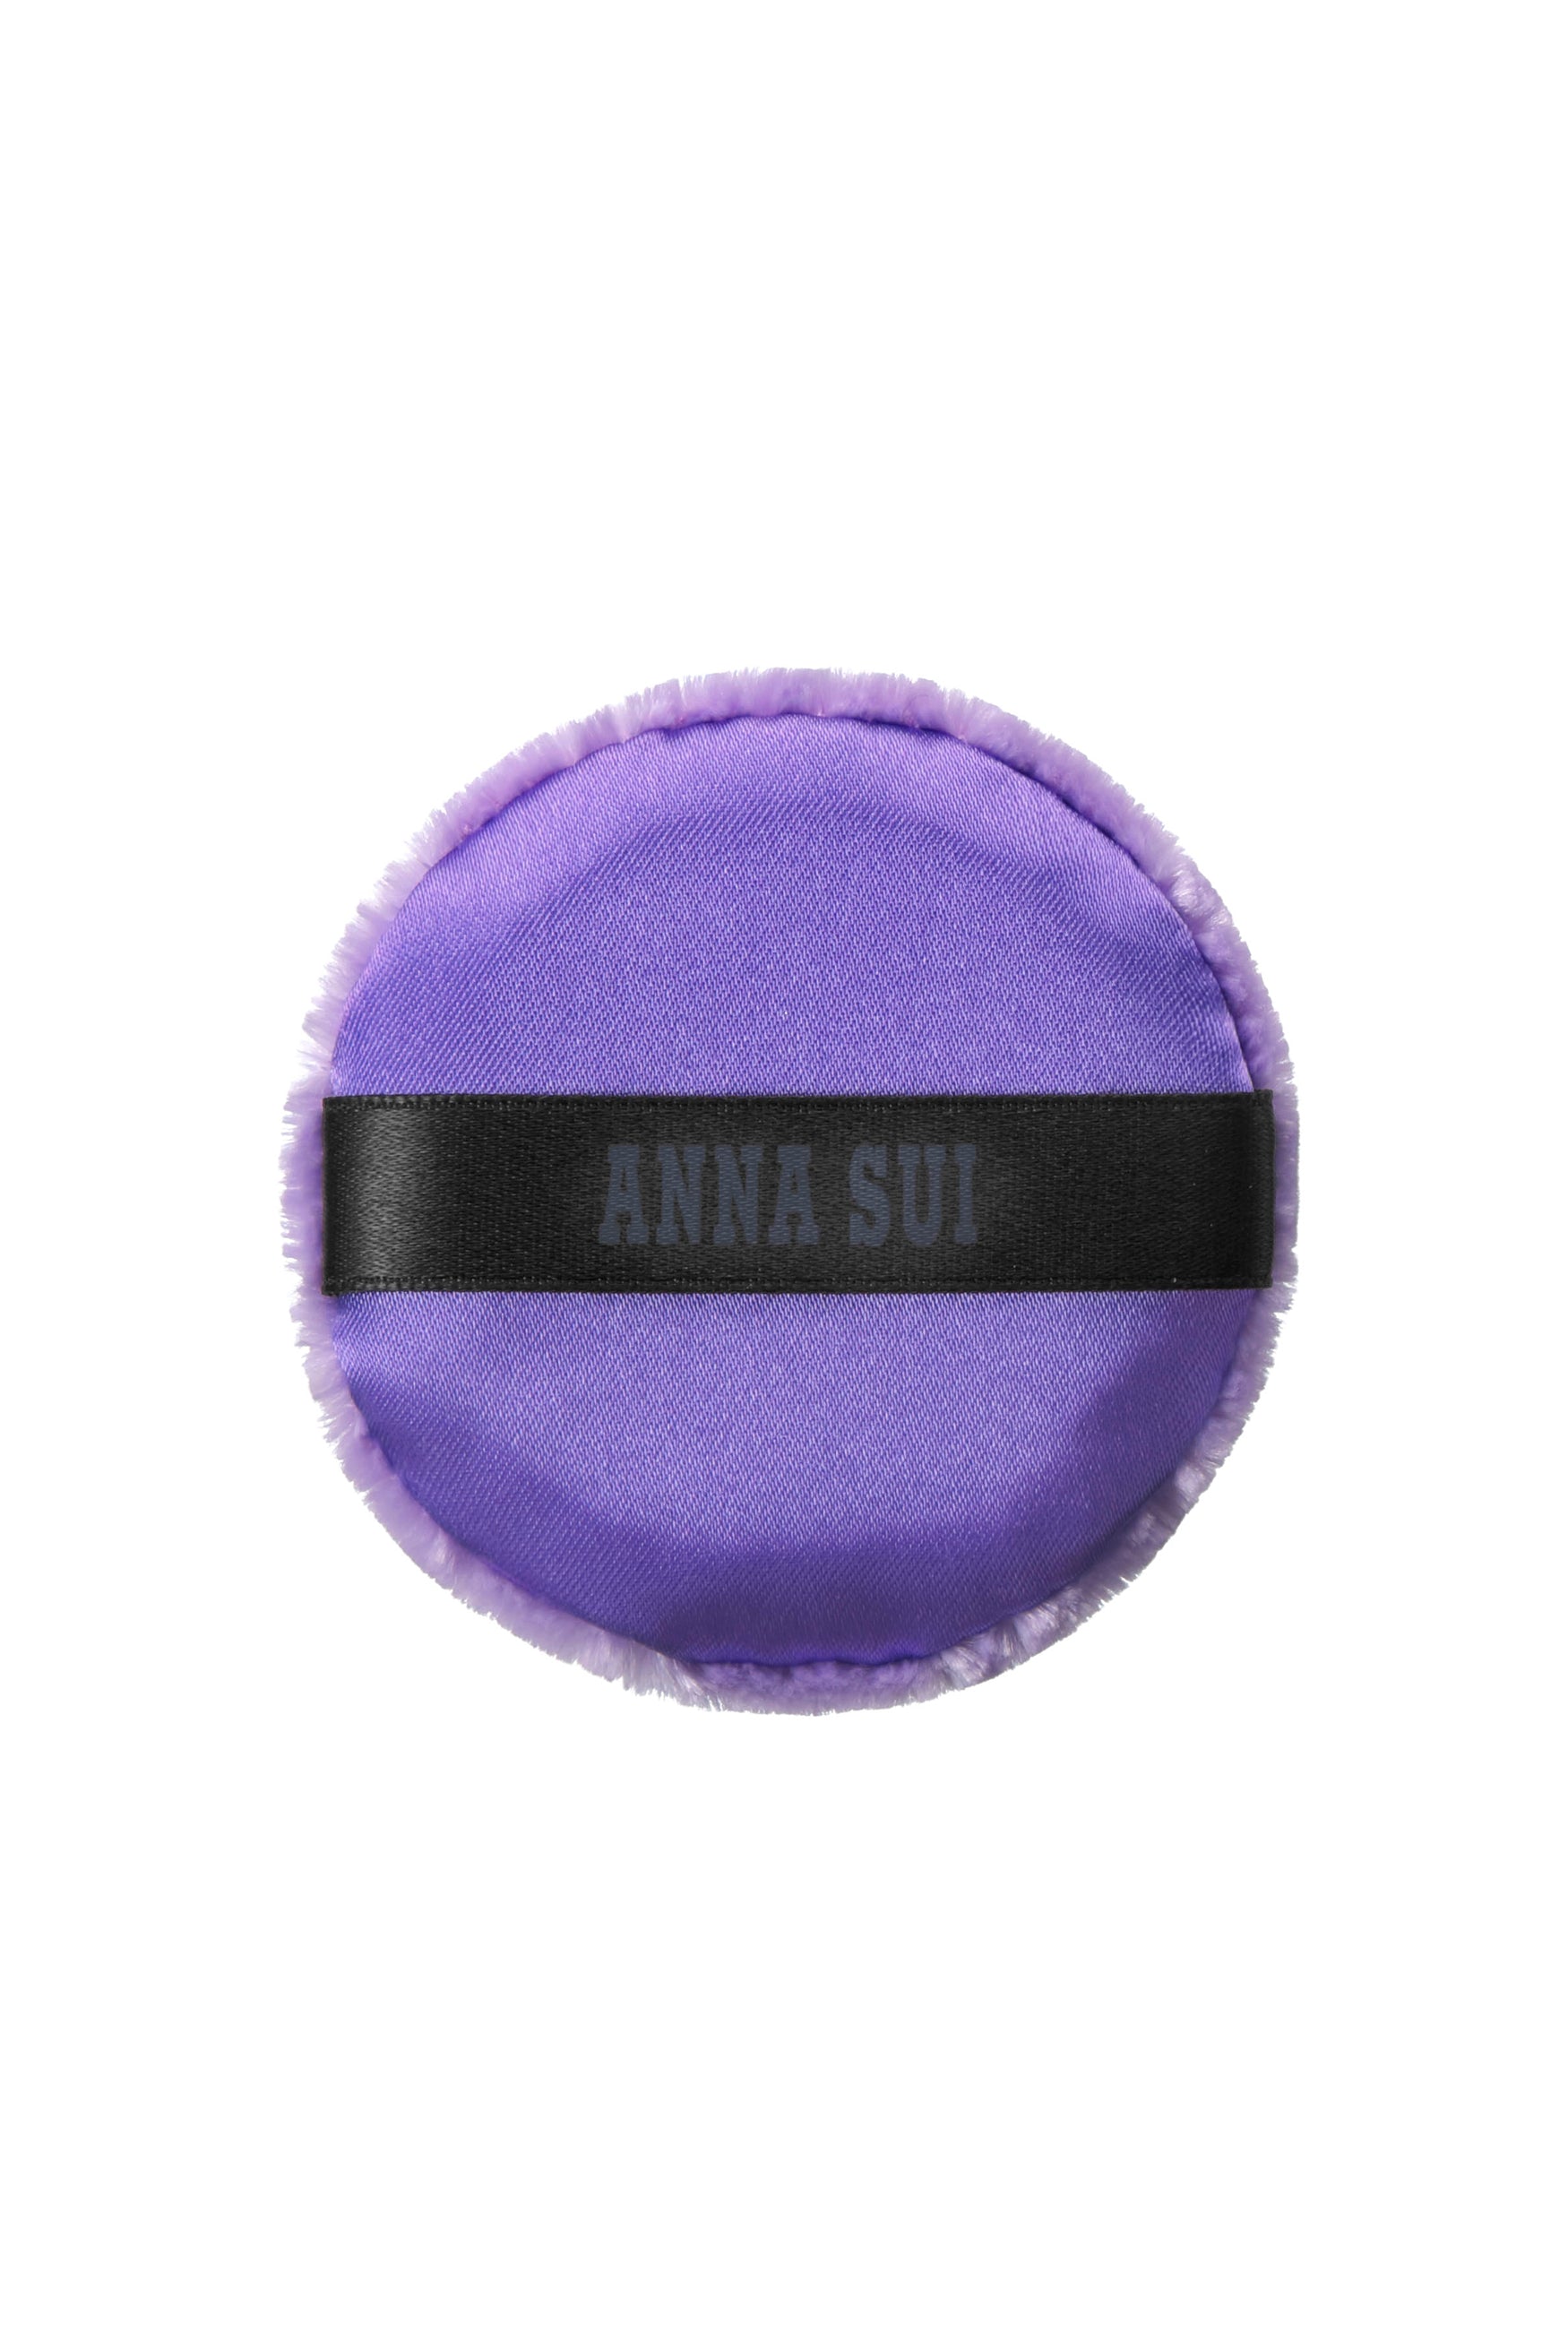 This soft powder mini purple with a black ribbon puff, conforms to the face as needed to apply powder